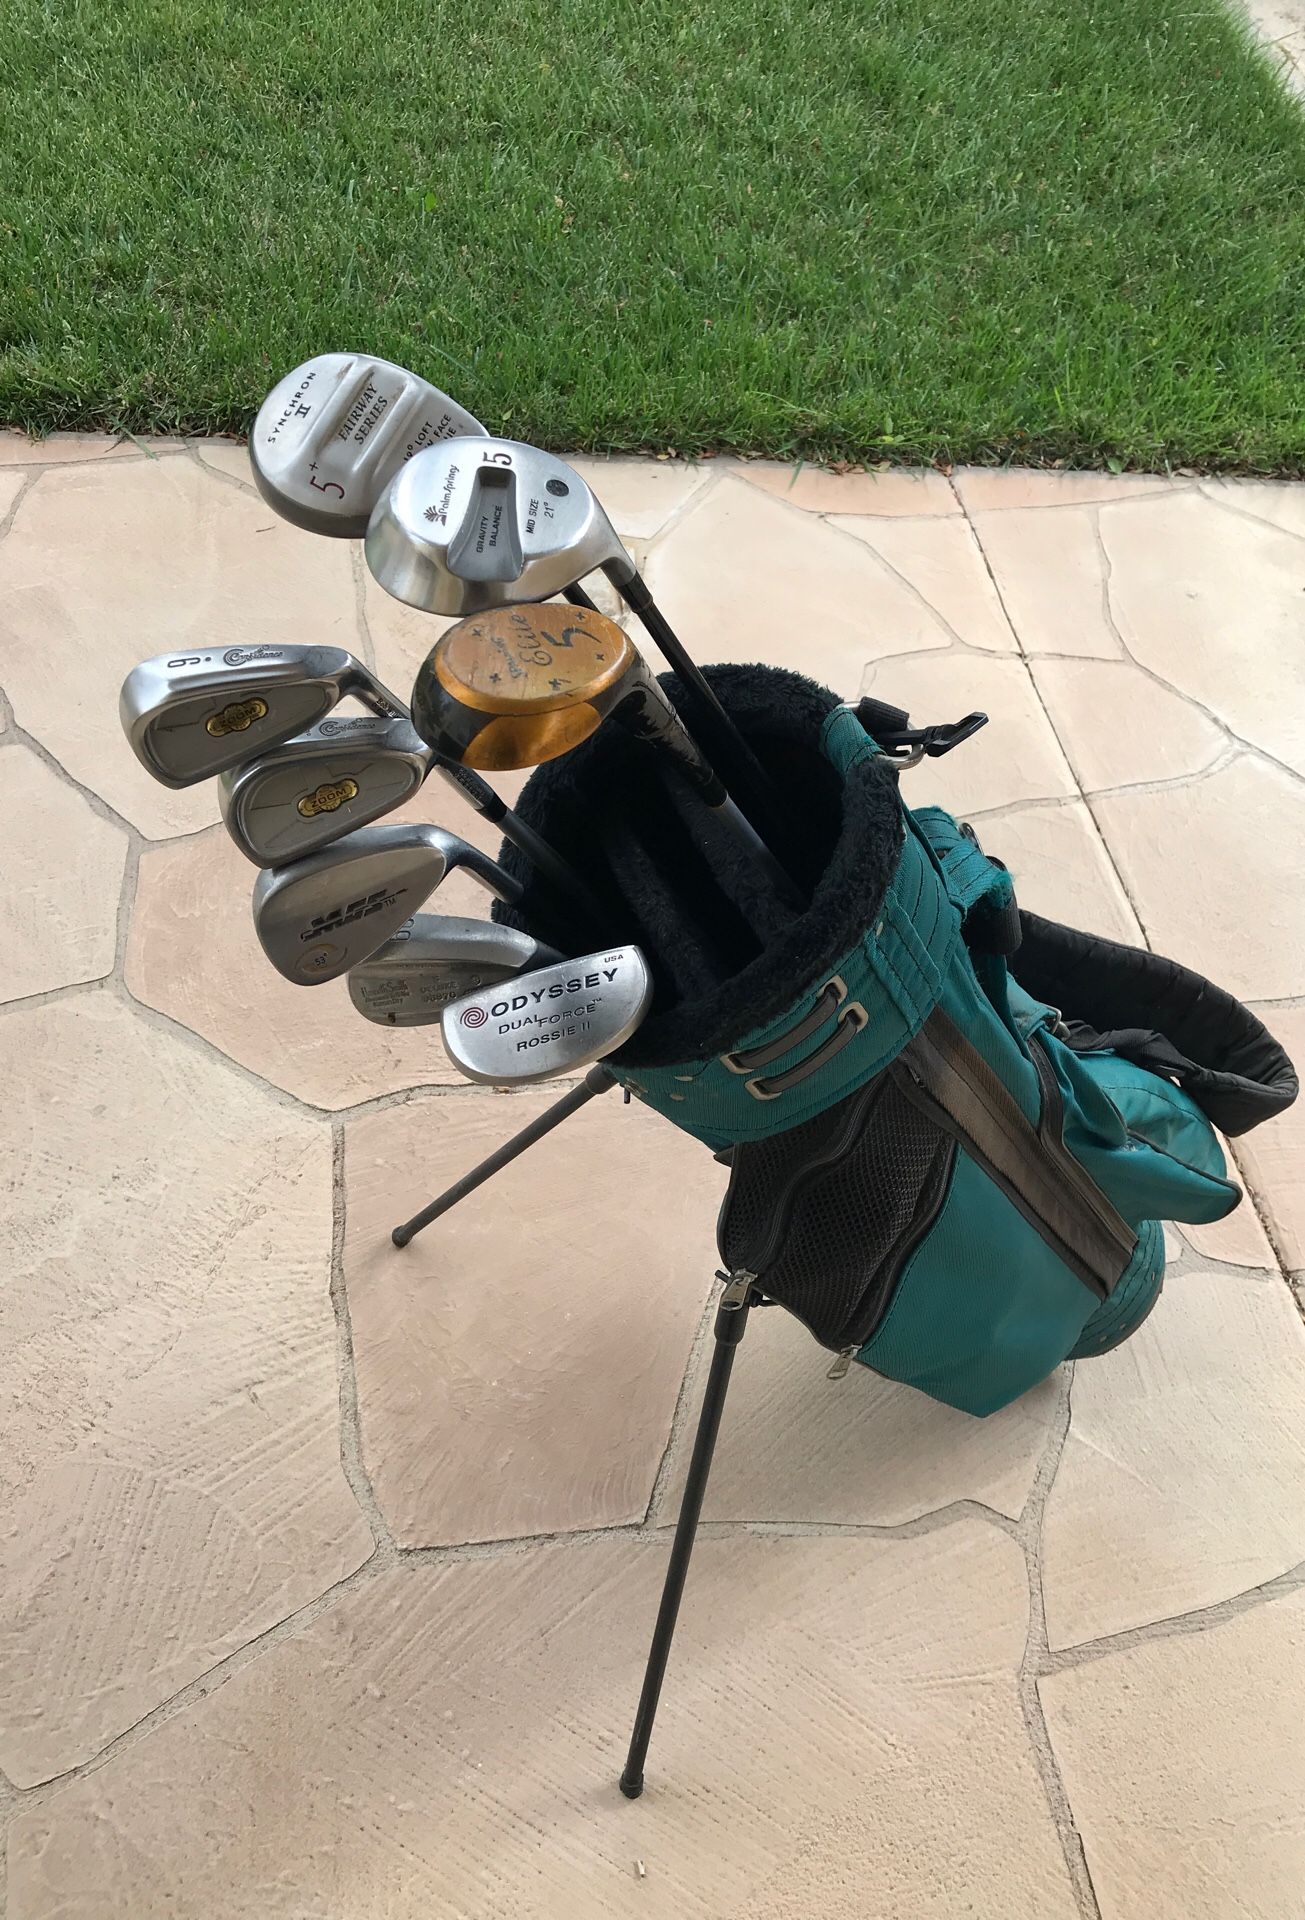 Used golf clubs. $45